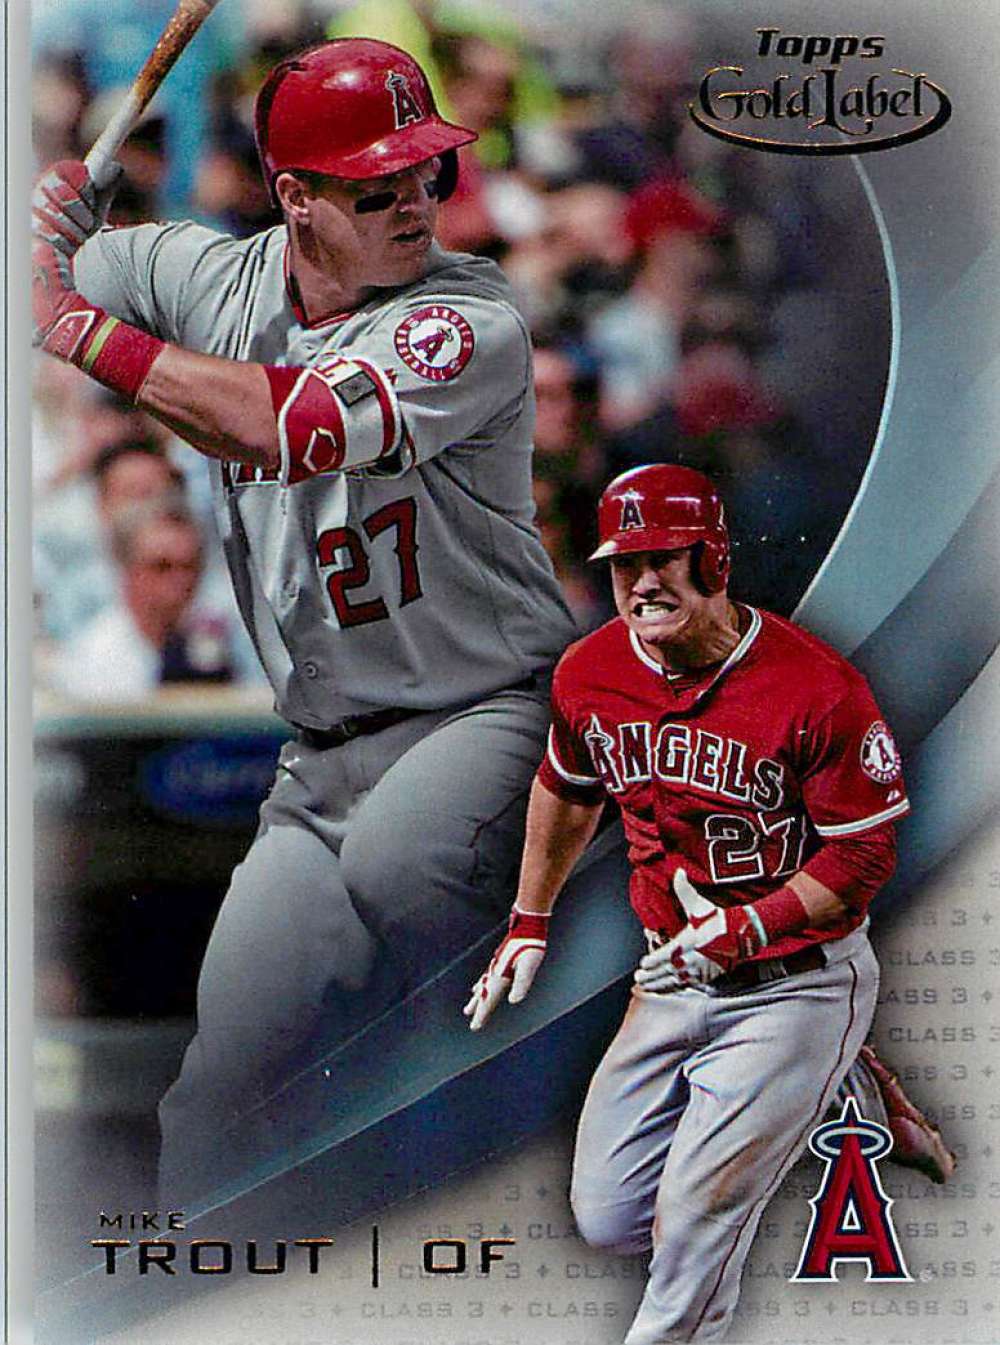 2016 Topps Gold Label Class 3